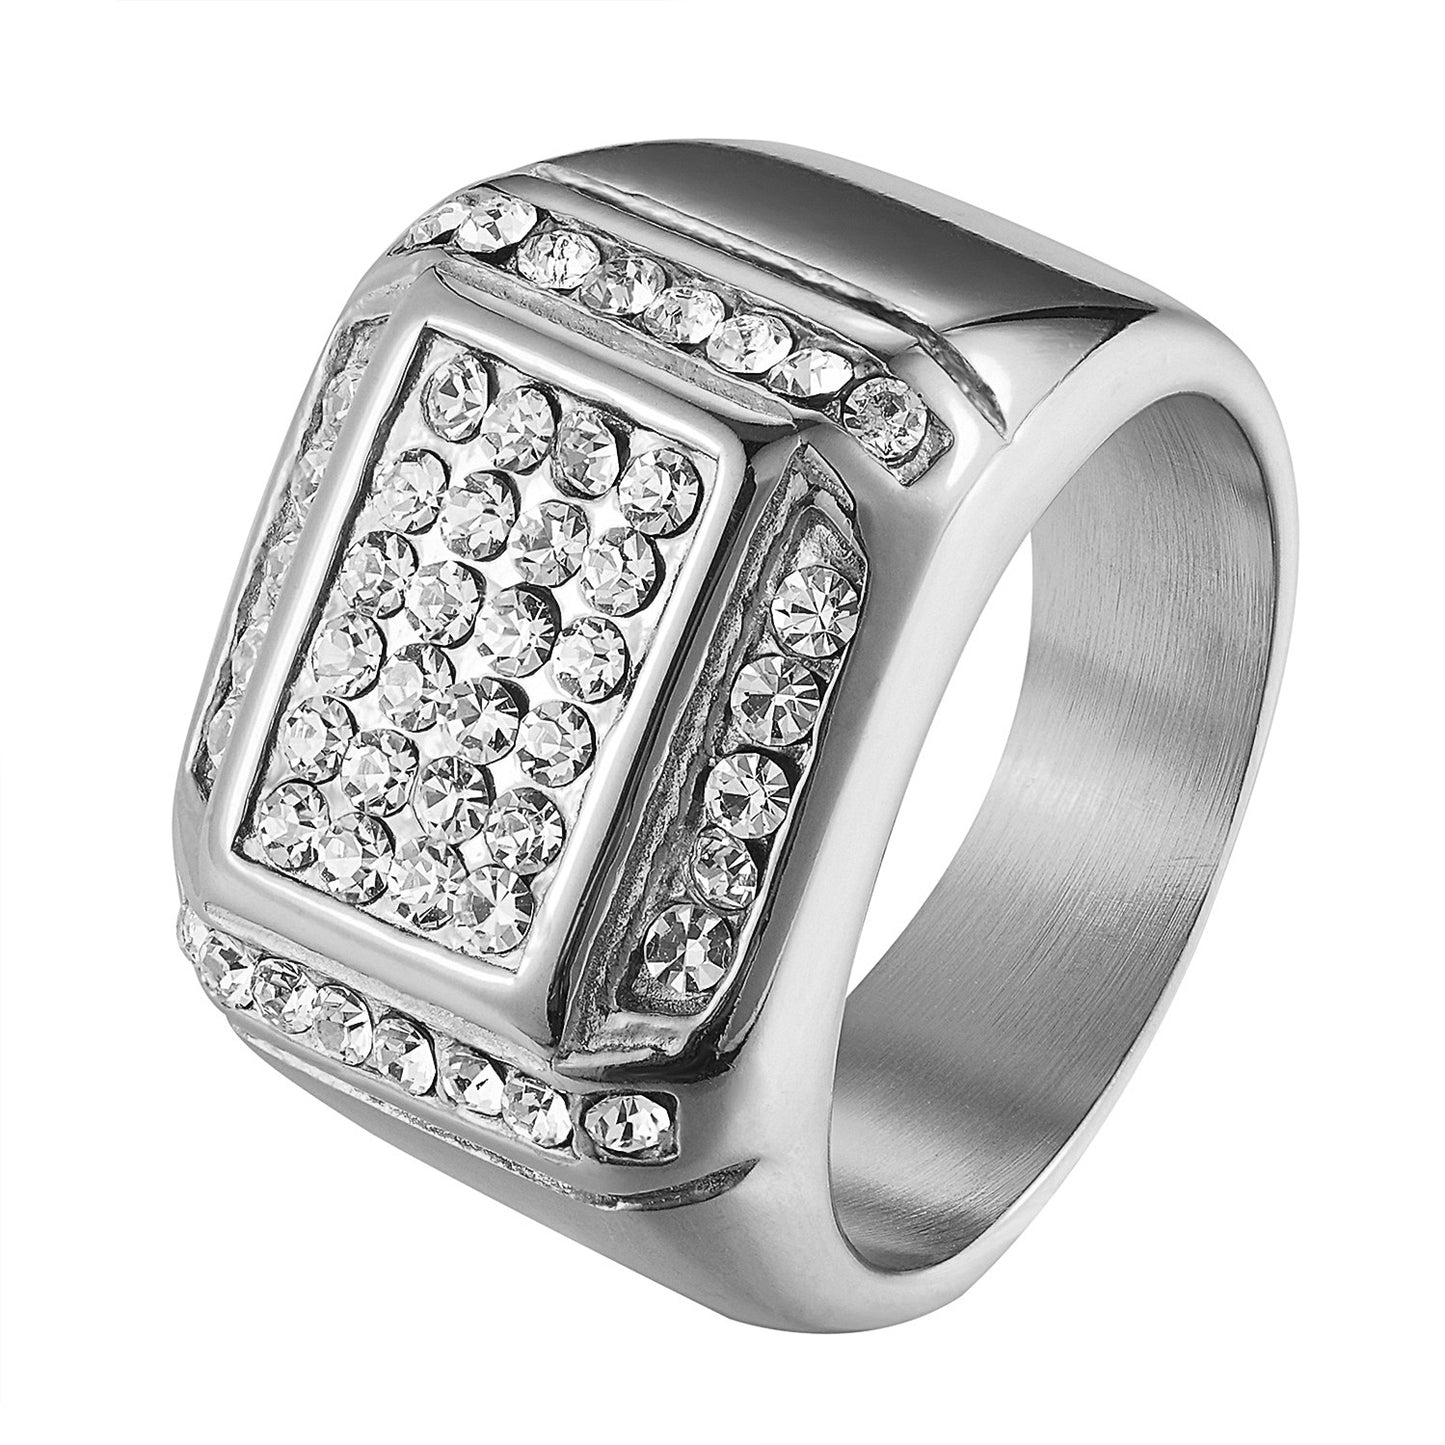 Stainless Steel Mens Ring Wedding Engagement Pinky Ring Simulated Diamonds